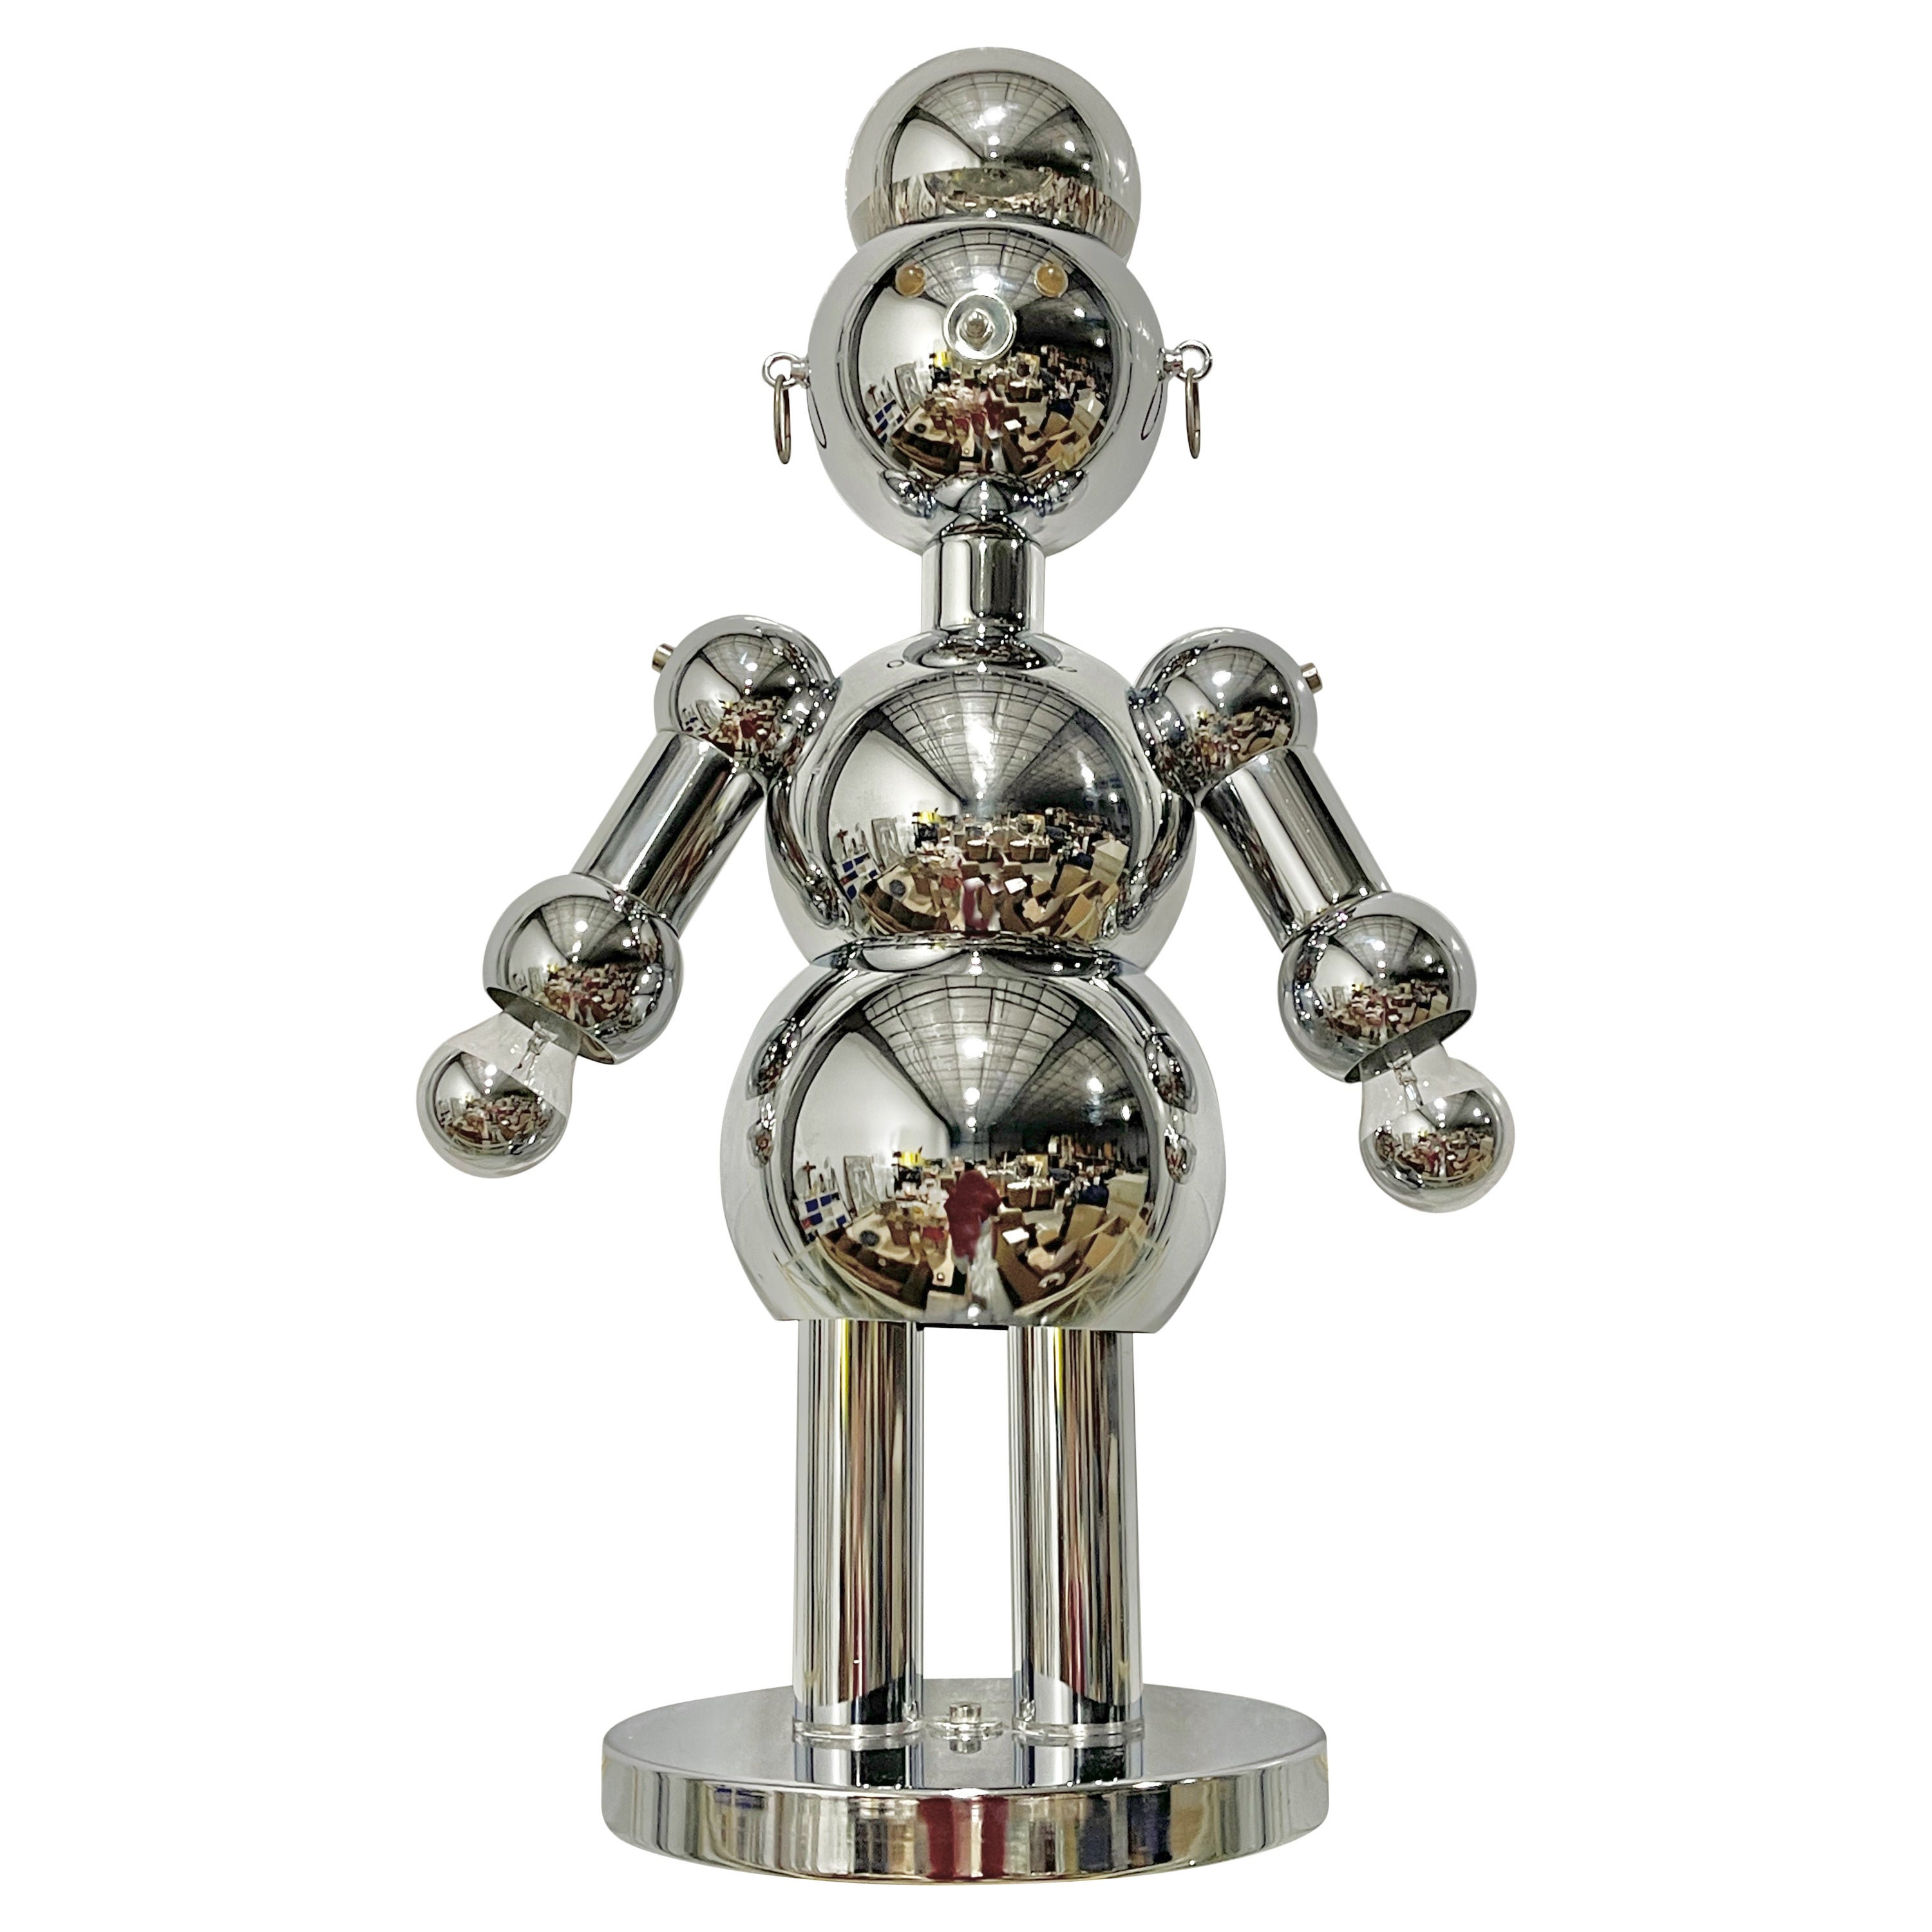 1970's Chrome Robot Lamp by Torino Lamps